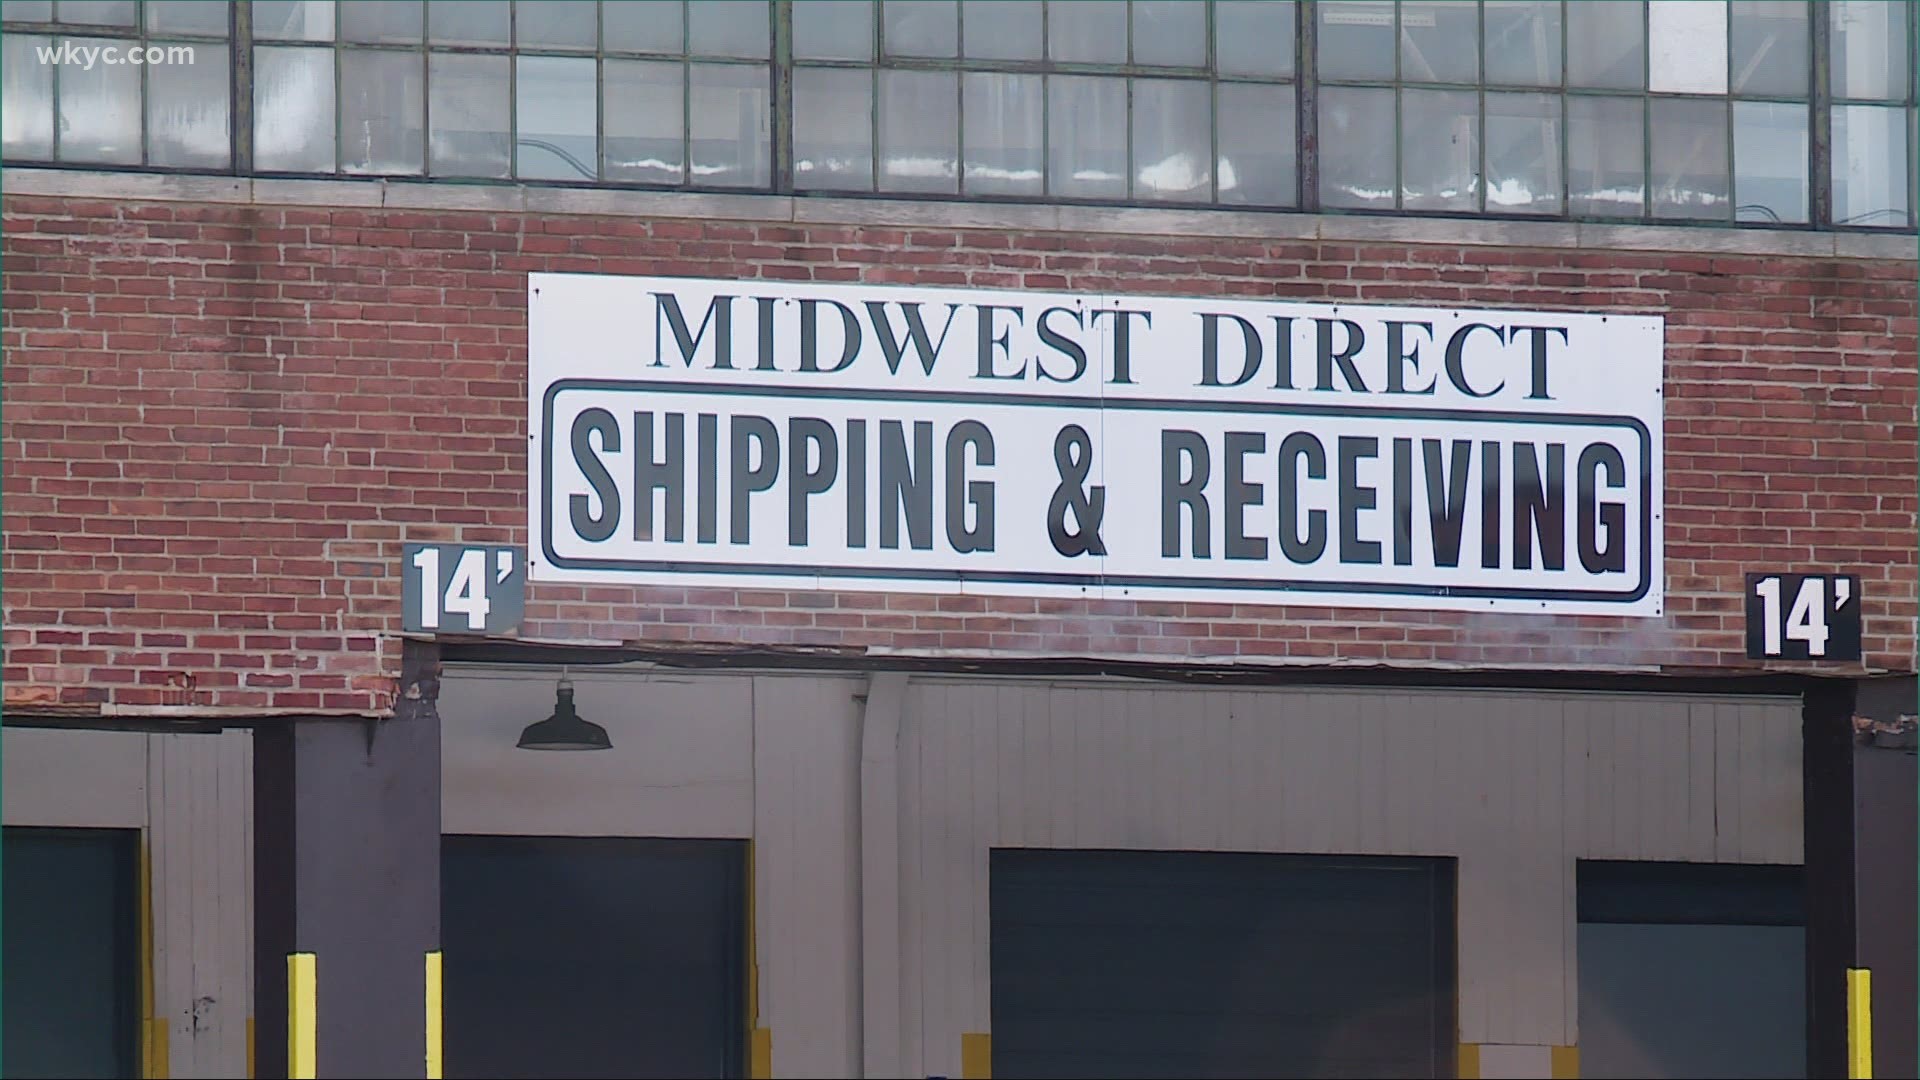 "We have since decided to fly only the American flag at Midwest," the company's co-owner tells 3News' Lynna Lai. Midwest Direct prints absentee ballots in Ohio.